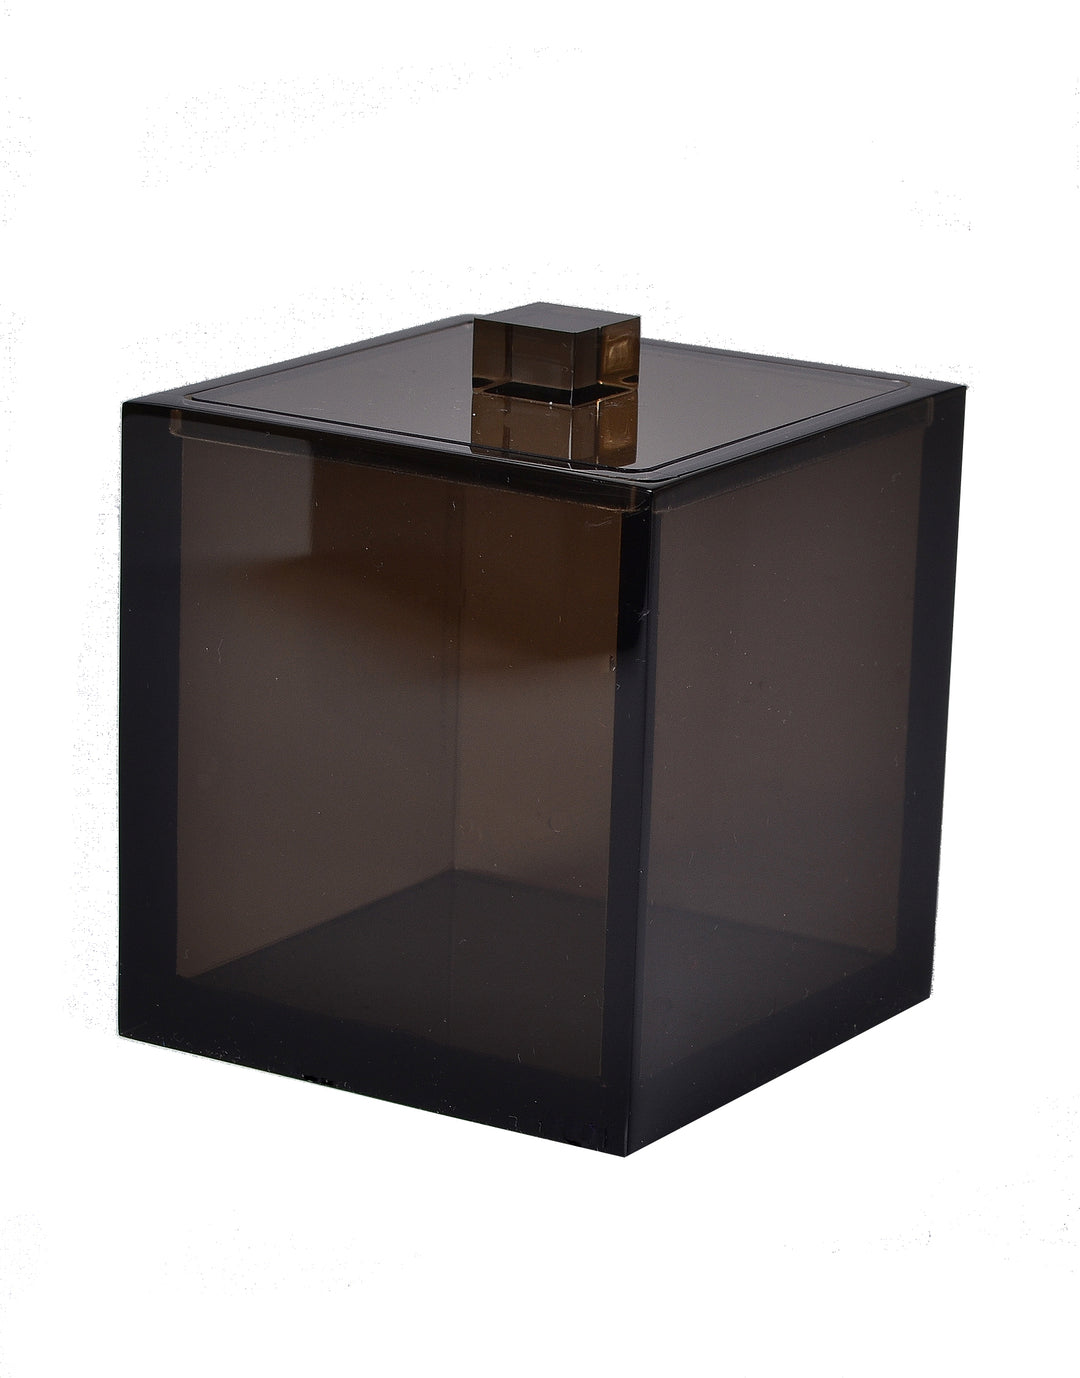 Mike + Ally Ice Smoked Lucite Bathroom Accessories